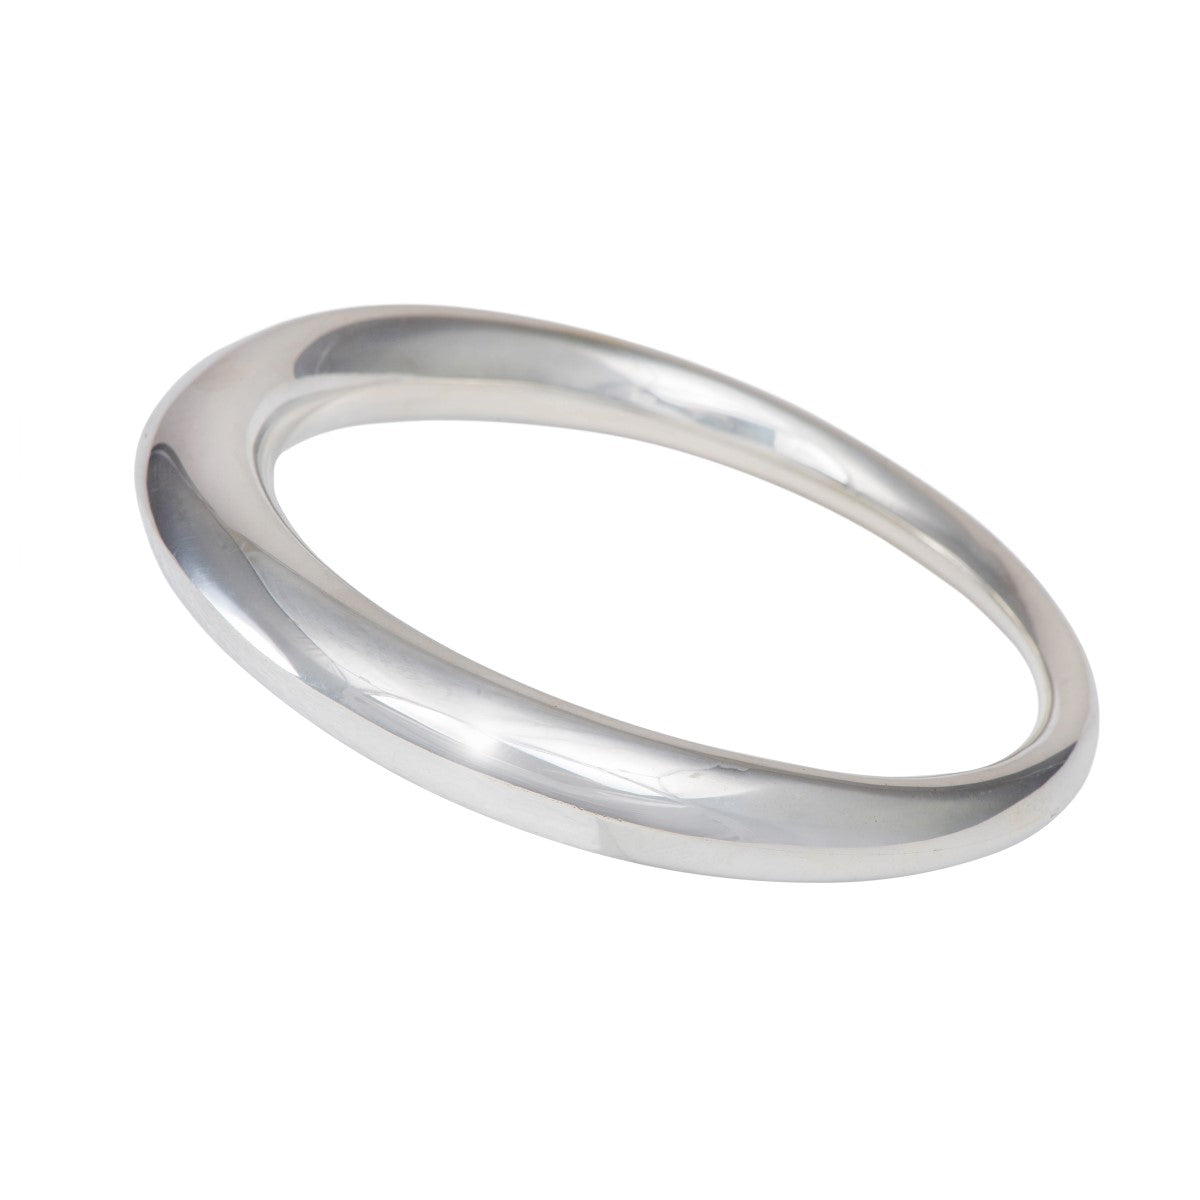 Chunky Silver Round Bangle with a Graduated Tapered Design